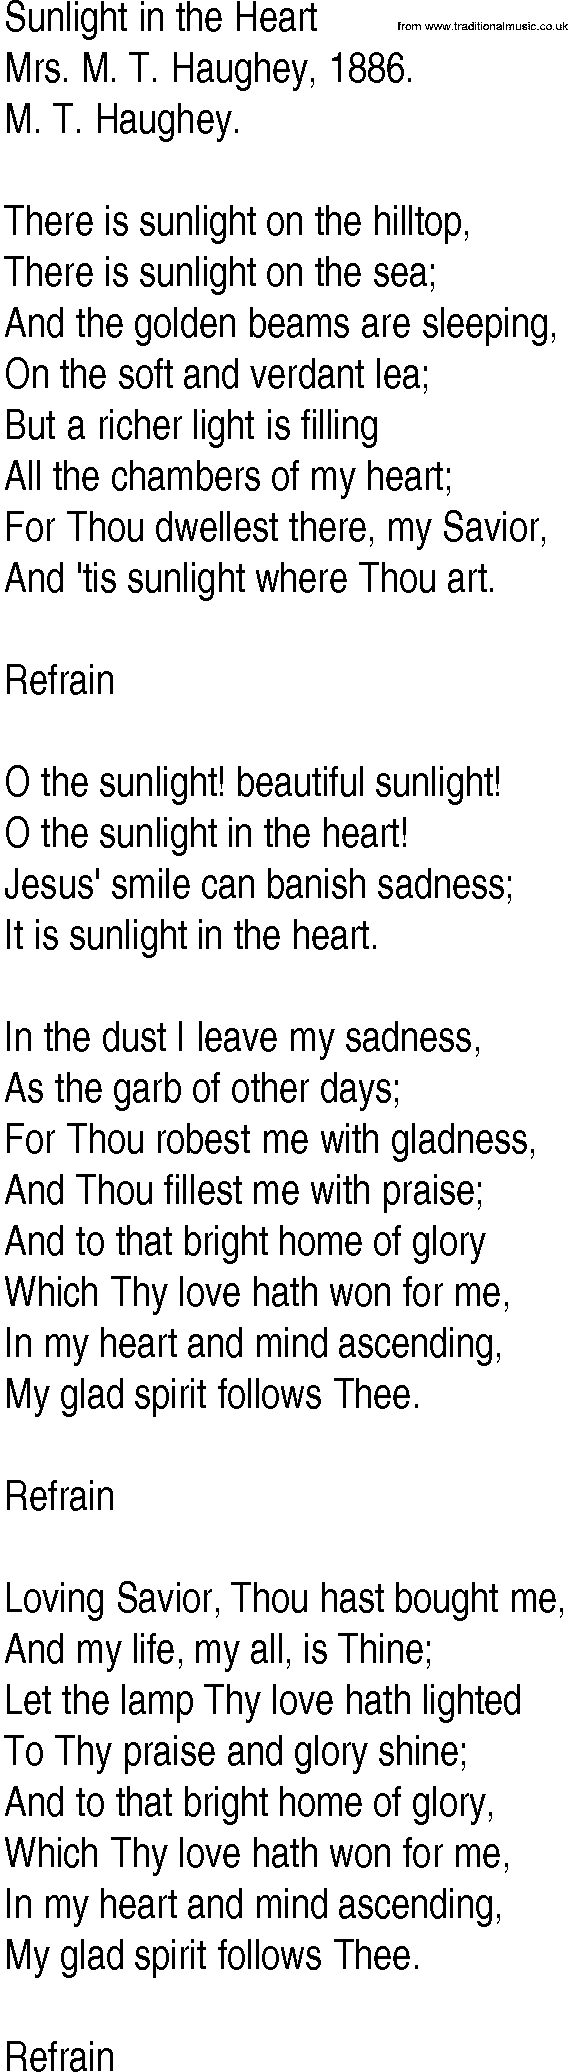 Hymn and Gospel Song: Sunlight in the Heart by Mrs M T Haughey lyrics